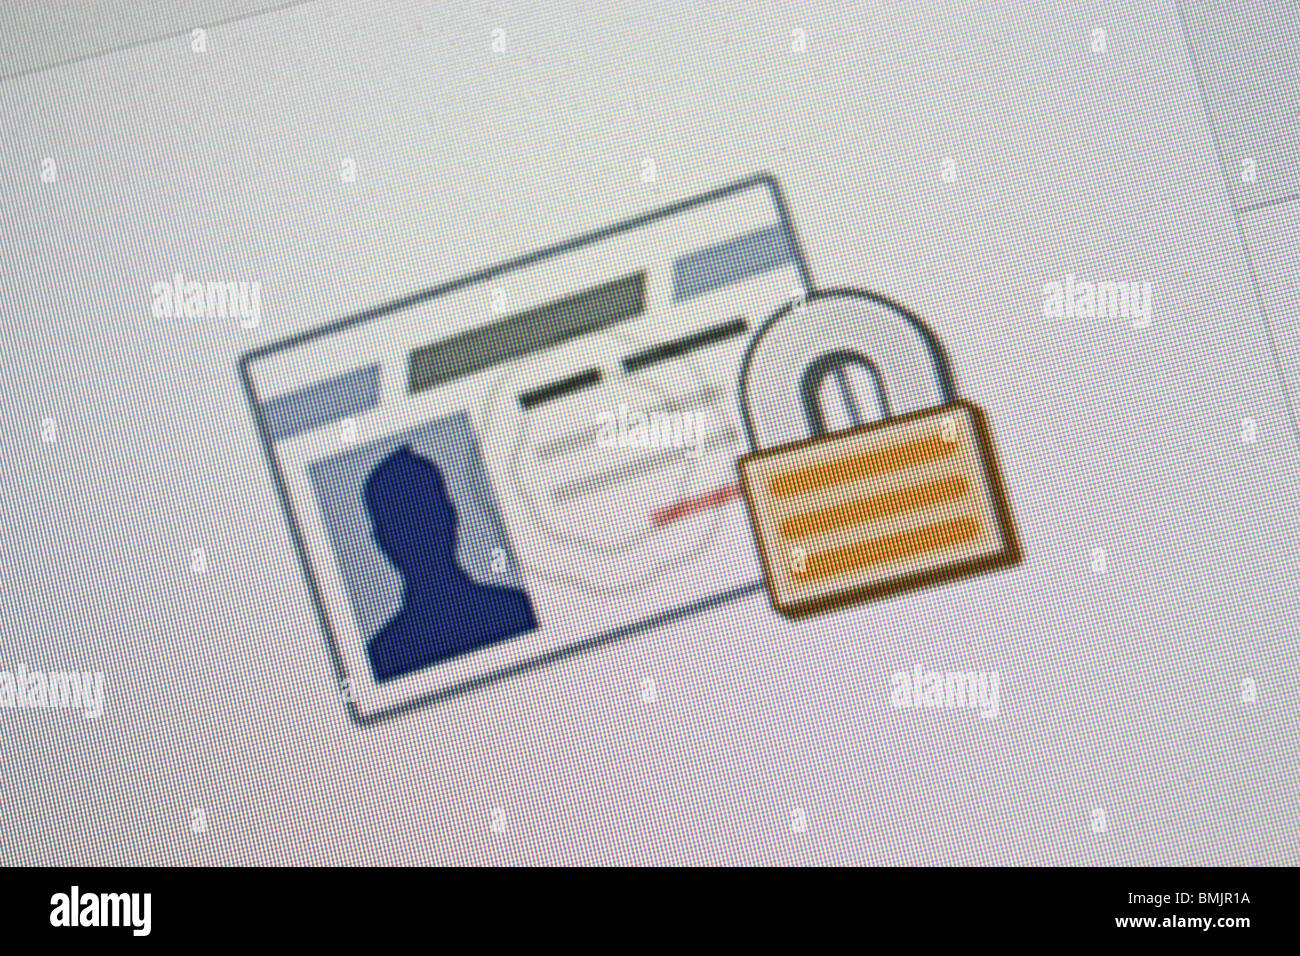 facebook privacy setting website social network Stock Photo